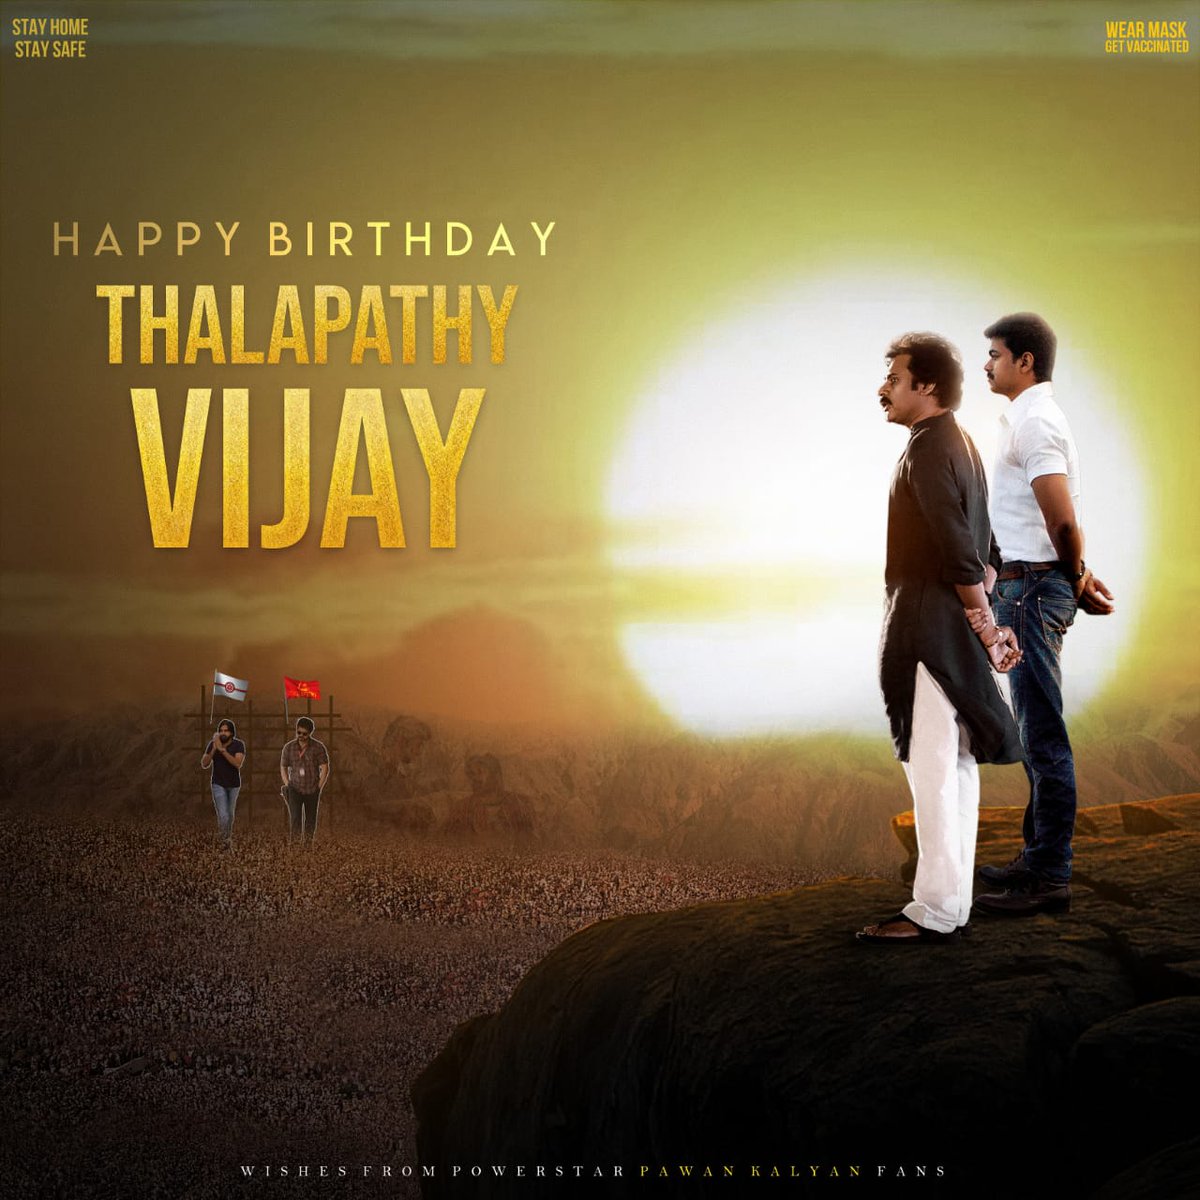 Birthday wishes to the Man of Masses... One and only Thalapathy @actorvijay garu from all @PawanKalyan Fans 💐 And Best wishes to #Beast 🤘 #HBDTHALAPATHYVijay #BeastSecondLook